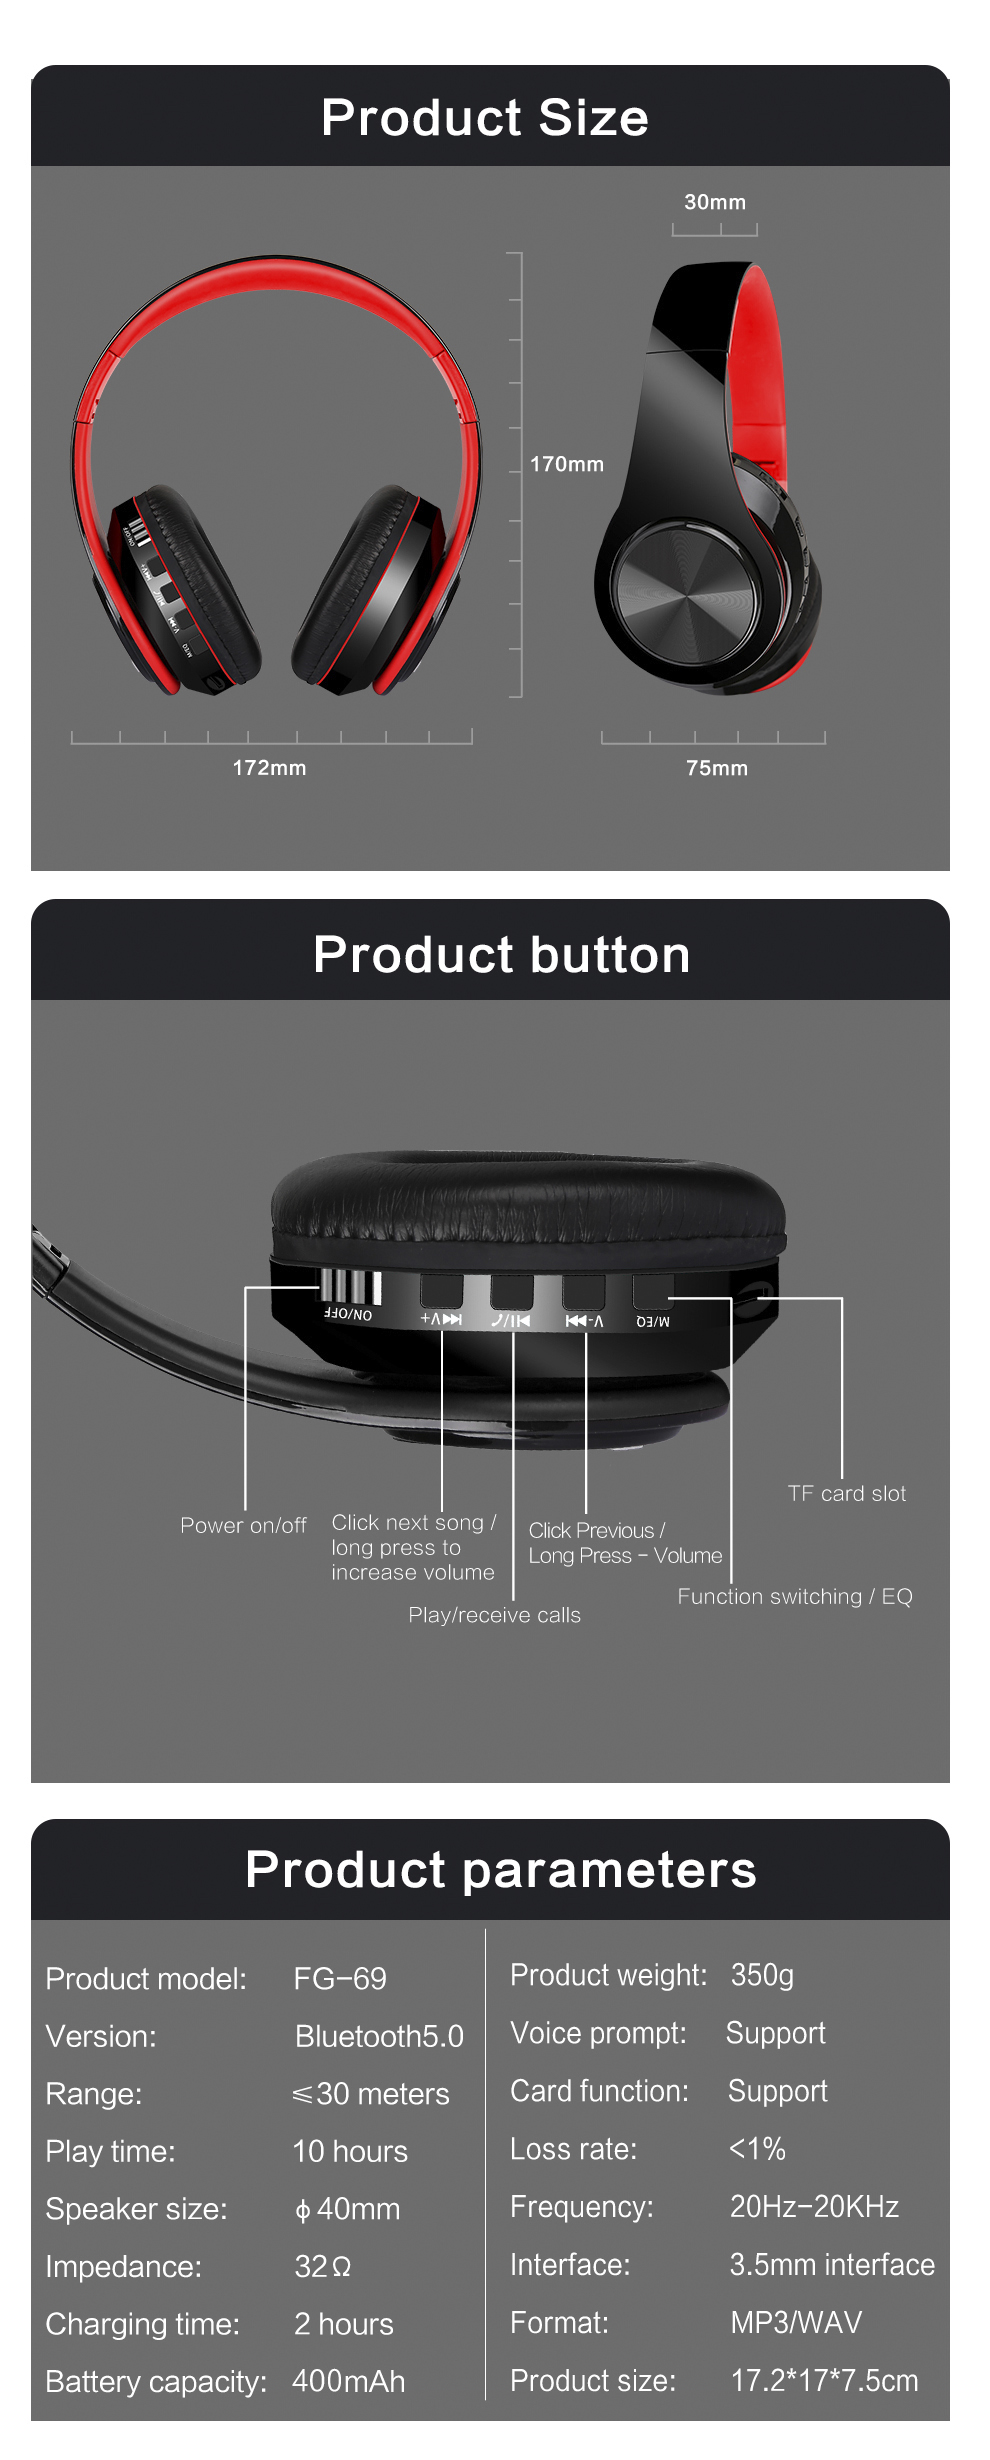 14. LM-FG69 Wireless Bluetooth Headset Bulk Corporate Purchase from China Union Power -Description-